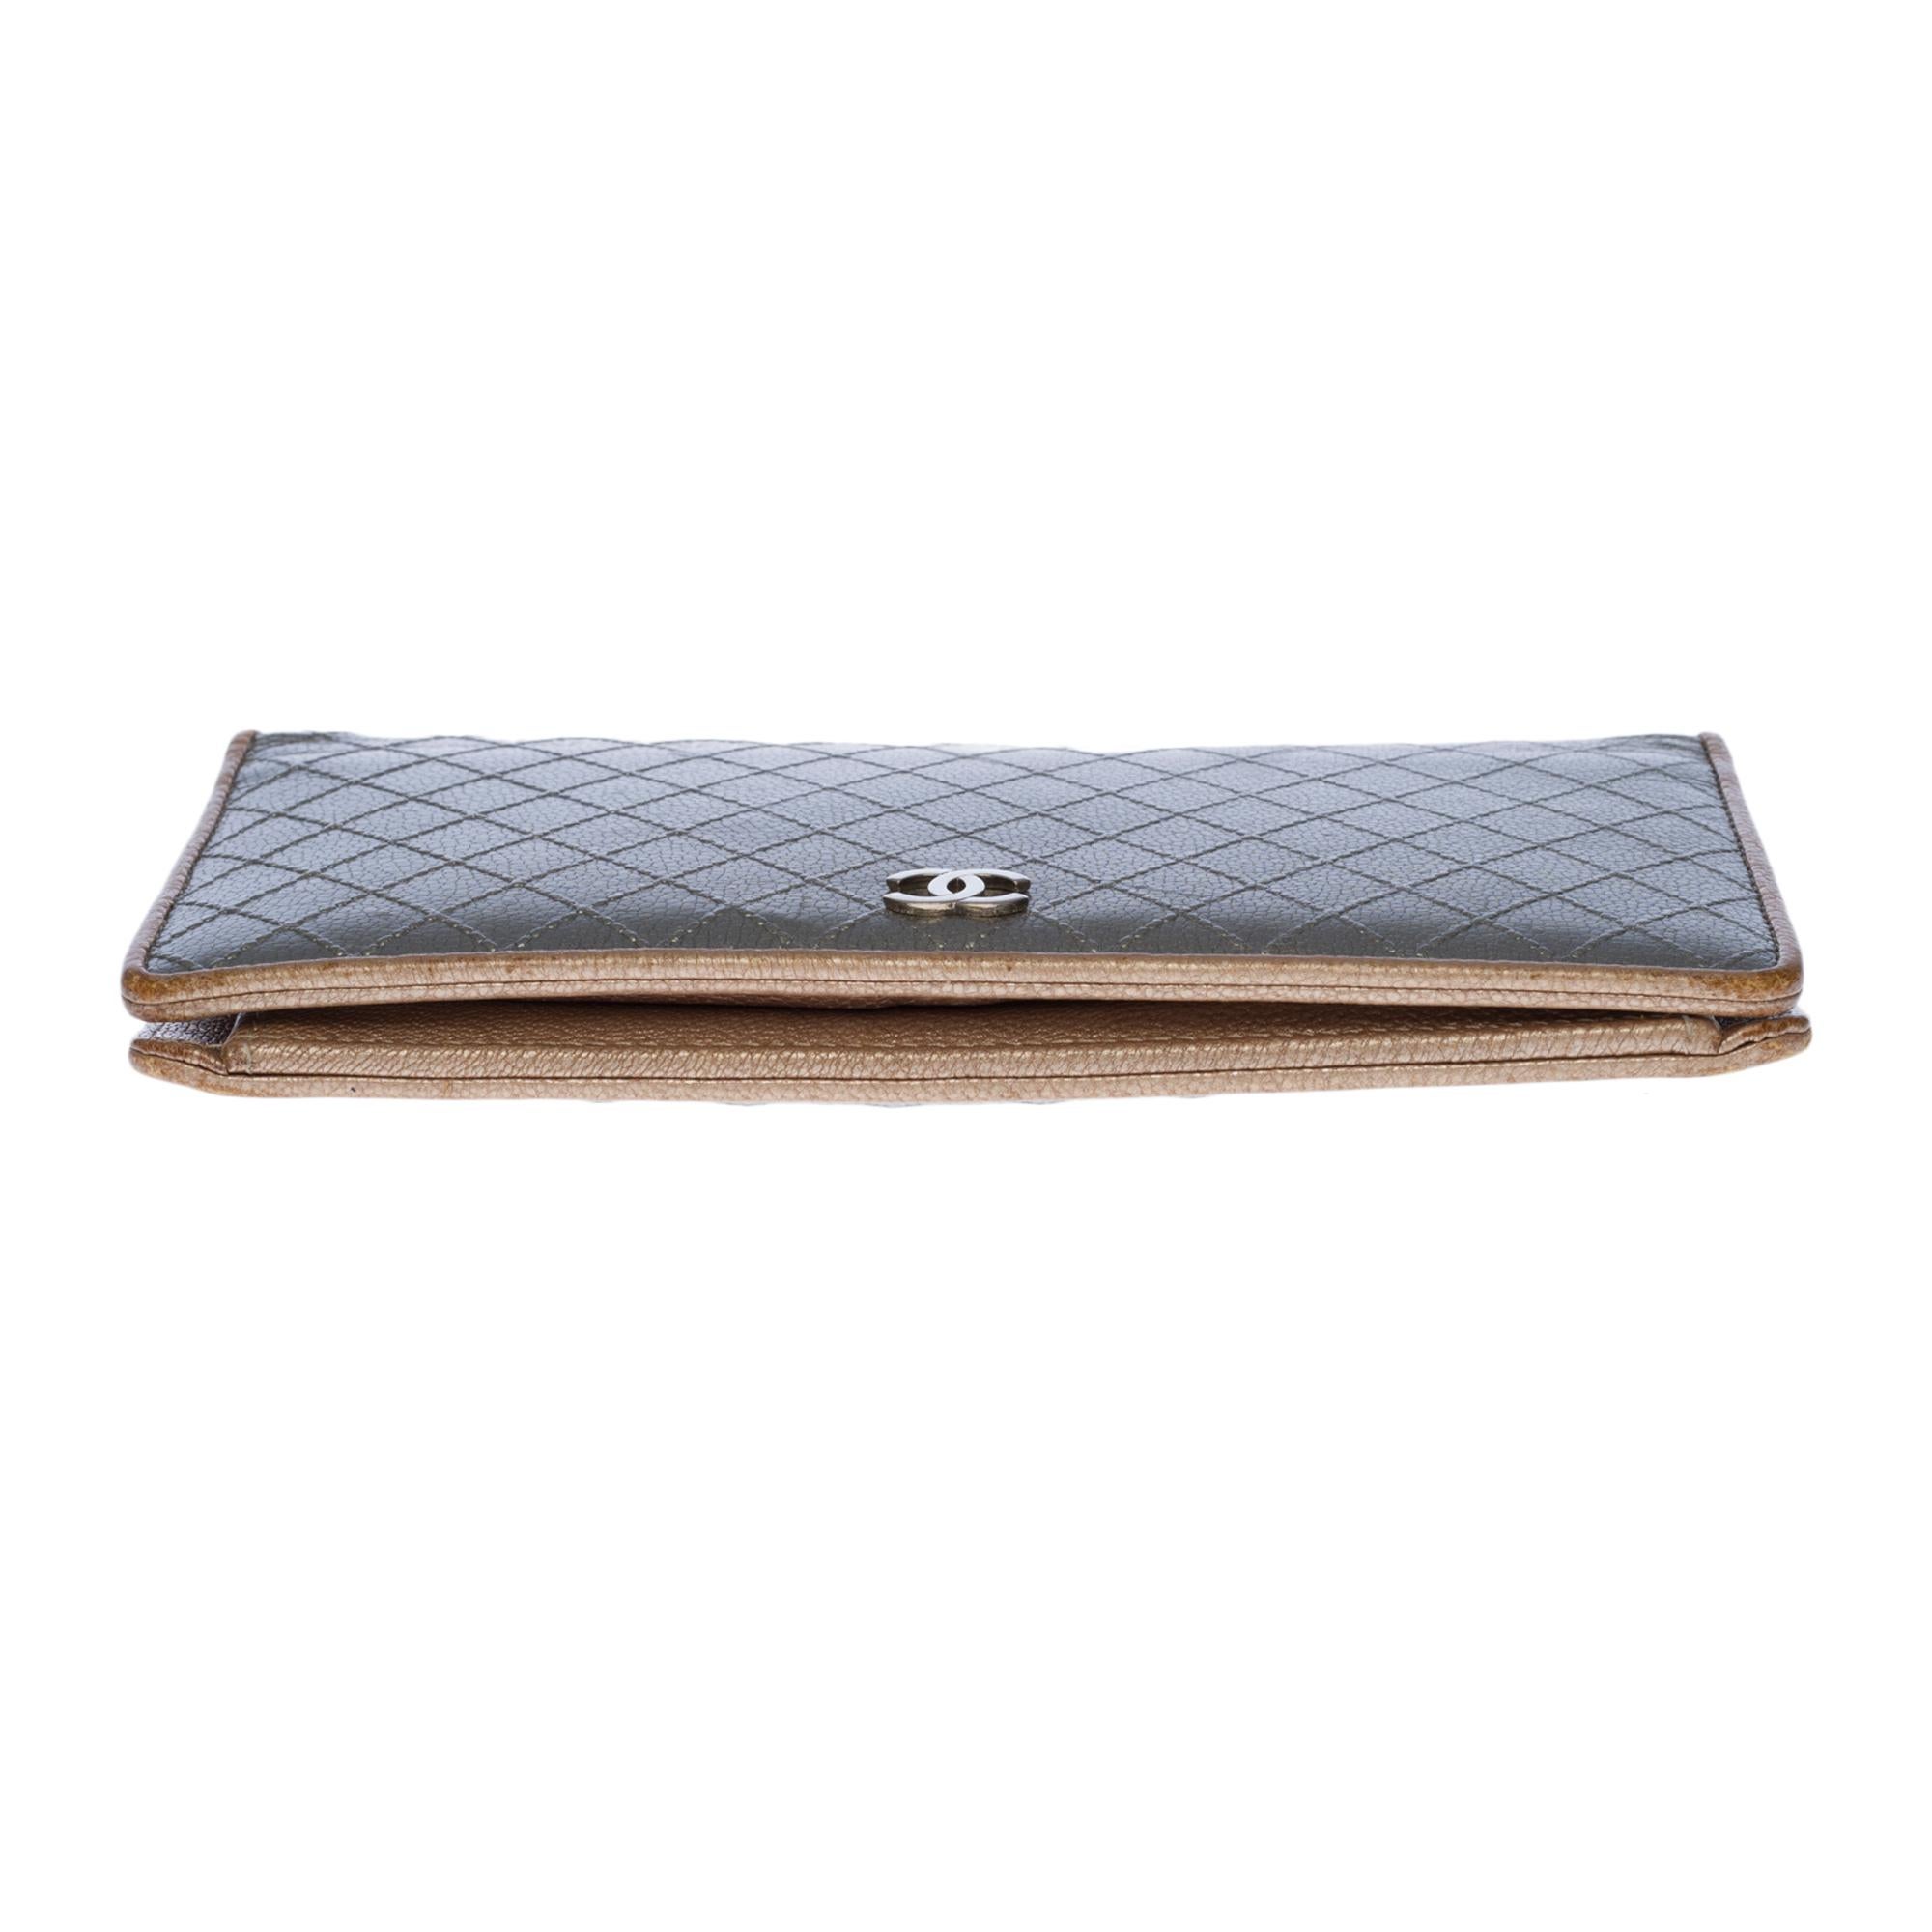 Women's Chanel Flap Wallet in Metallic Silver lambskin leather and Gold-tone interior For Sale